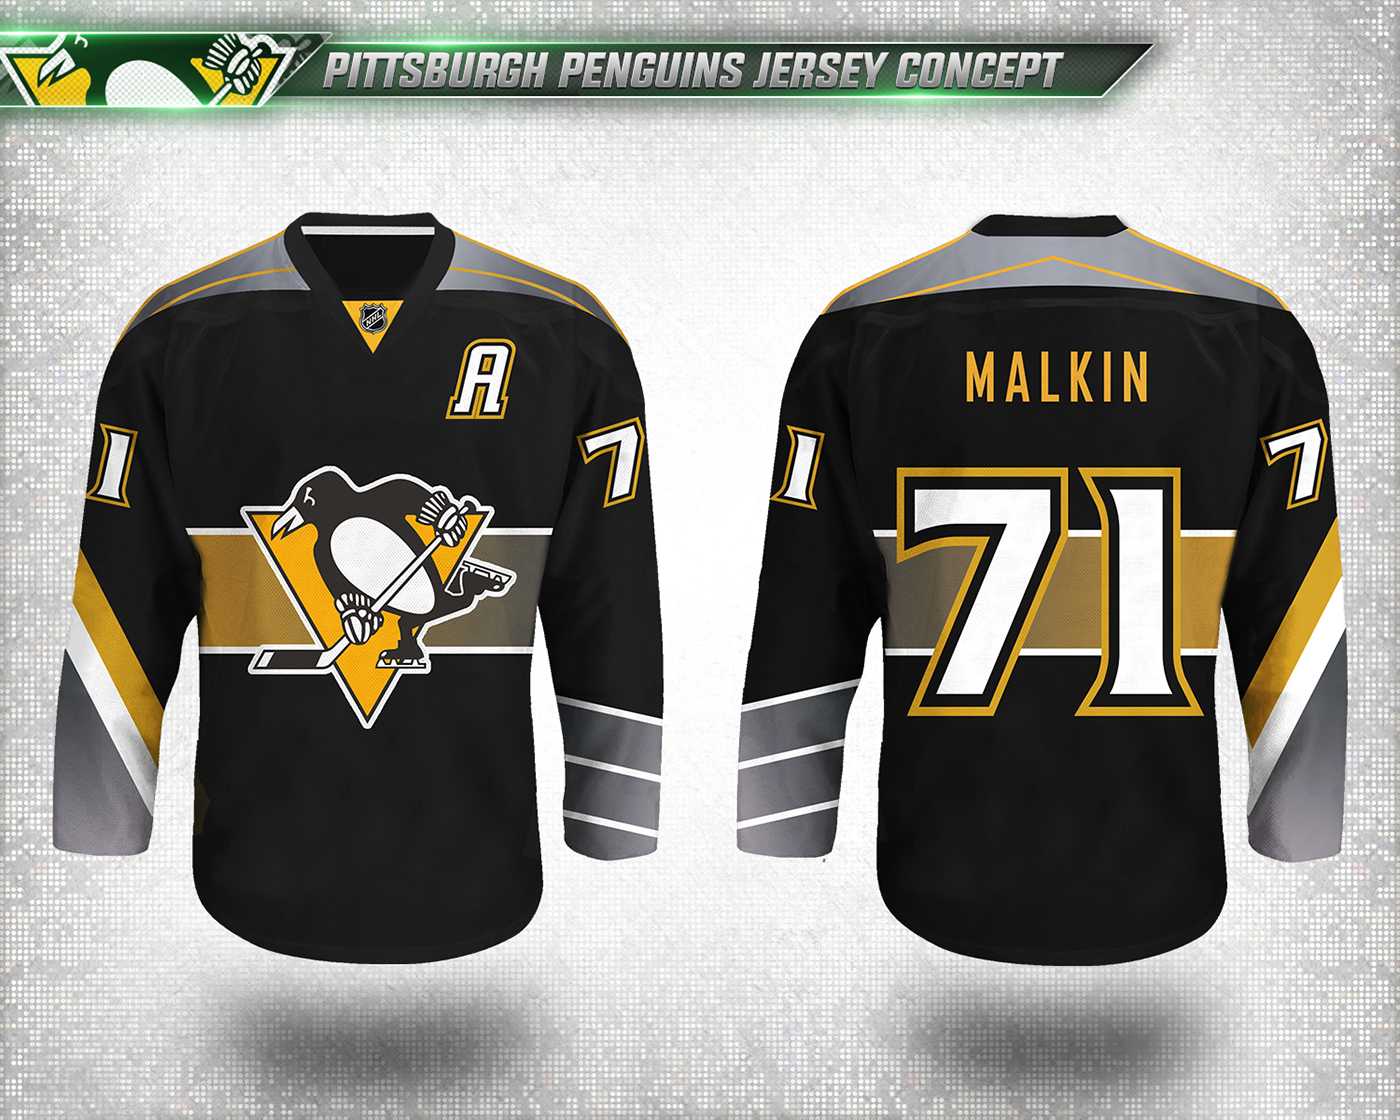 NHL Jersey Concepts on Behance